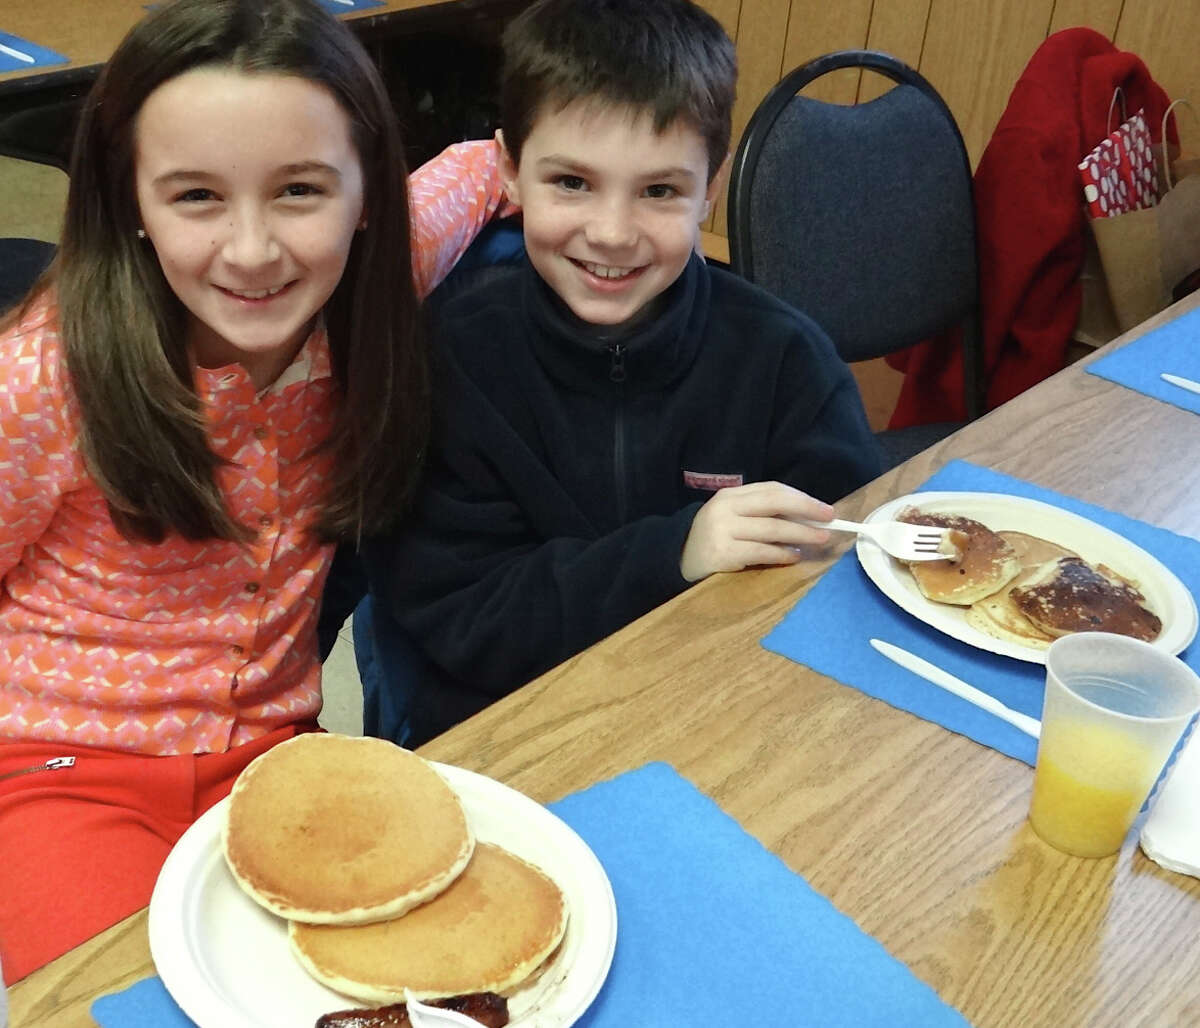 Sadie Bernstein and Hudson Houghton, both 9, of Fairfield, are all smiles at the Fairfield Masonic Lodge annual pancake breakfast fundraiser on Saturday. FAIRFIELD CITIZEN, CT 3/2/13